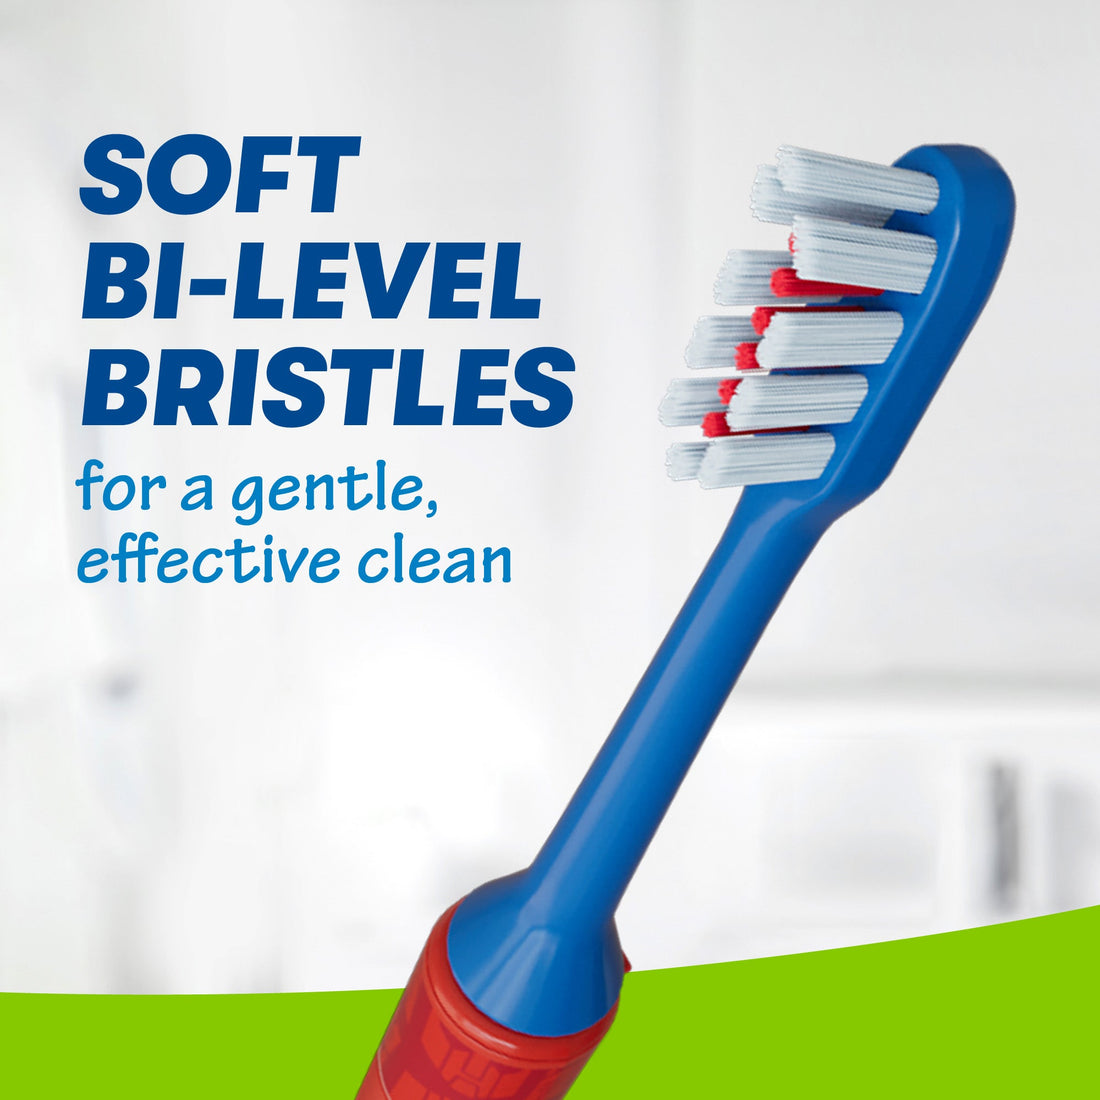 Close up of Transformers Sonic Toothbrush, Soft Bi-level bristles for a gentle, effective clean